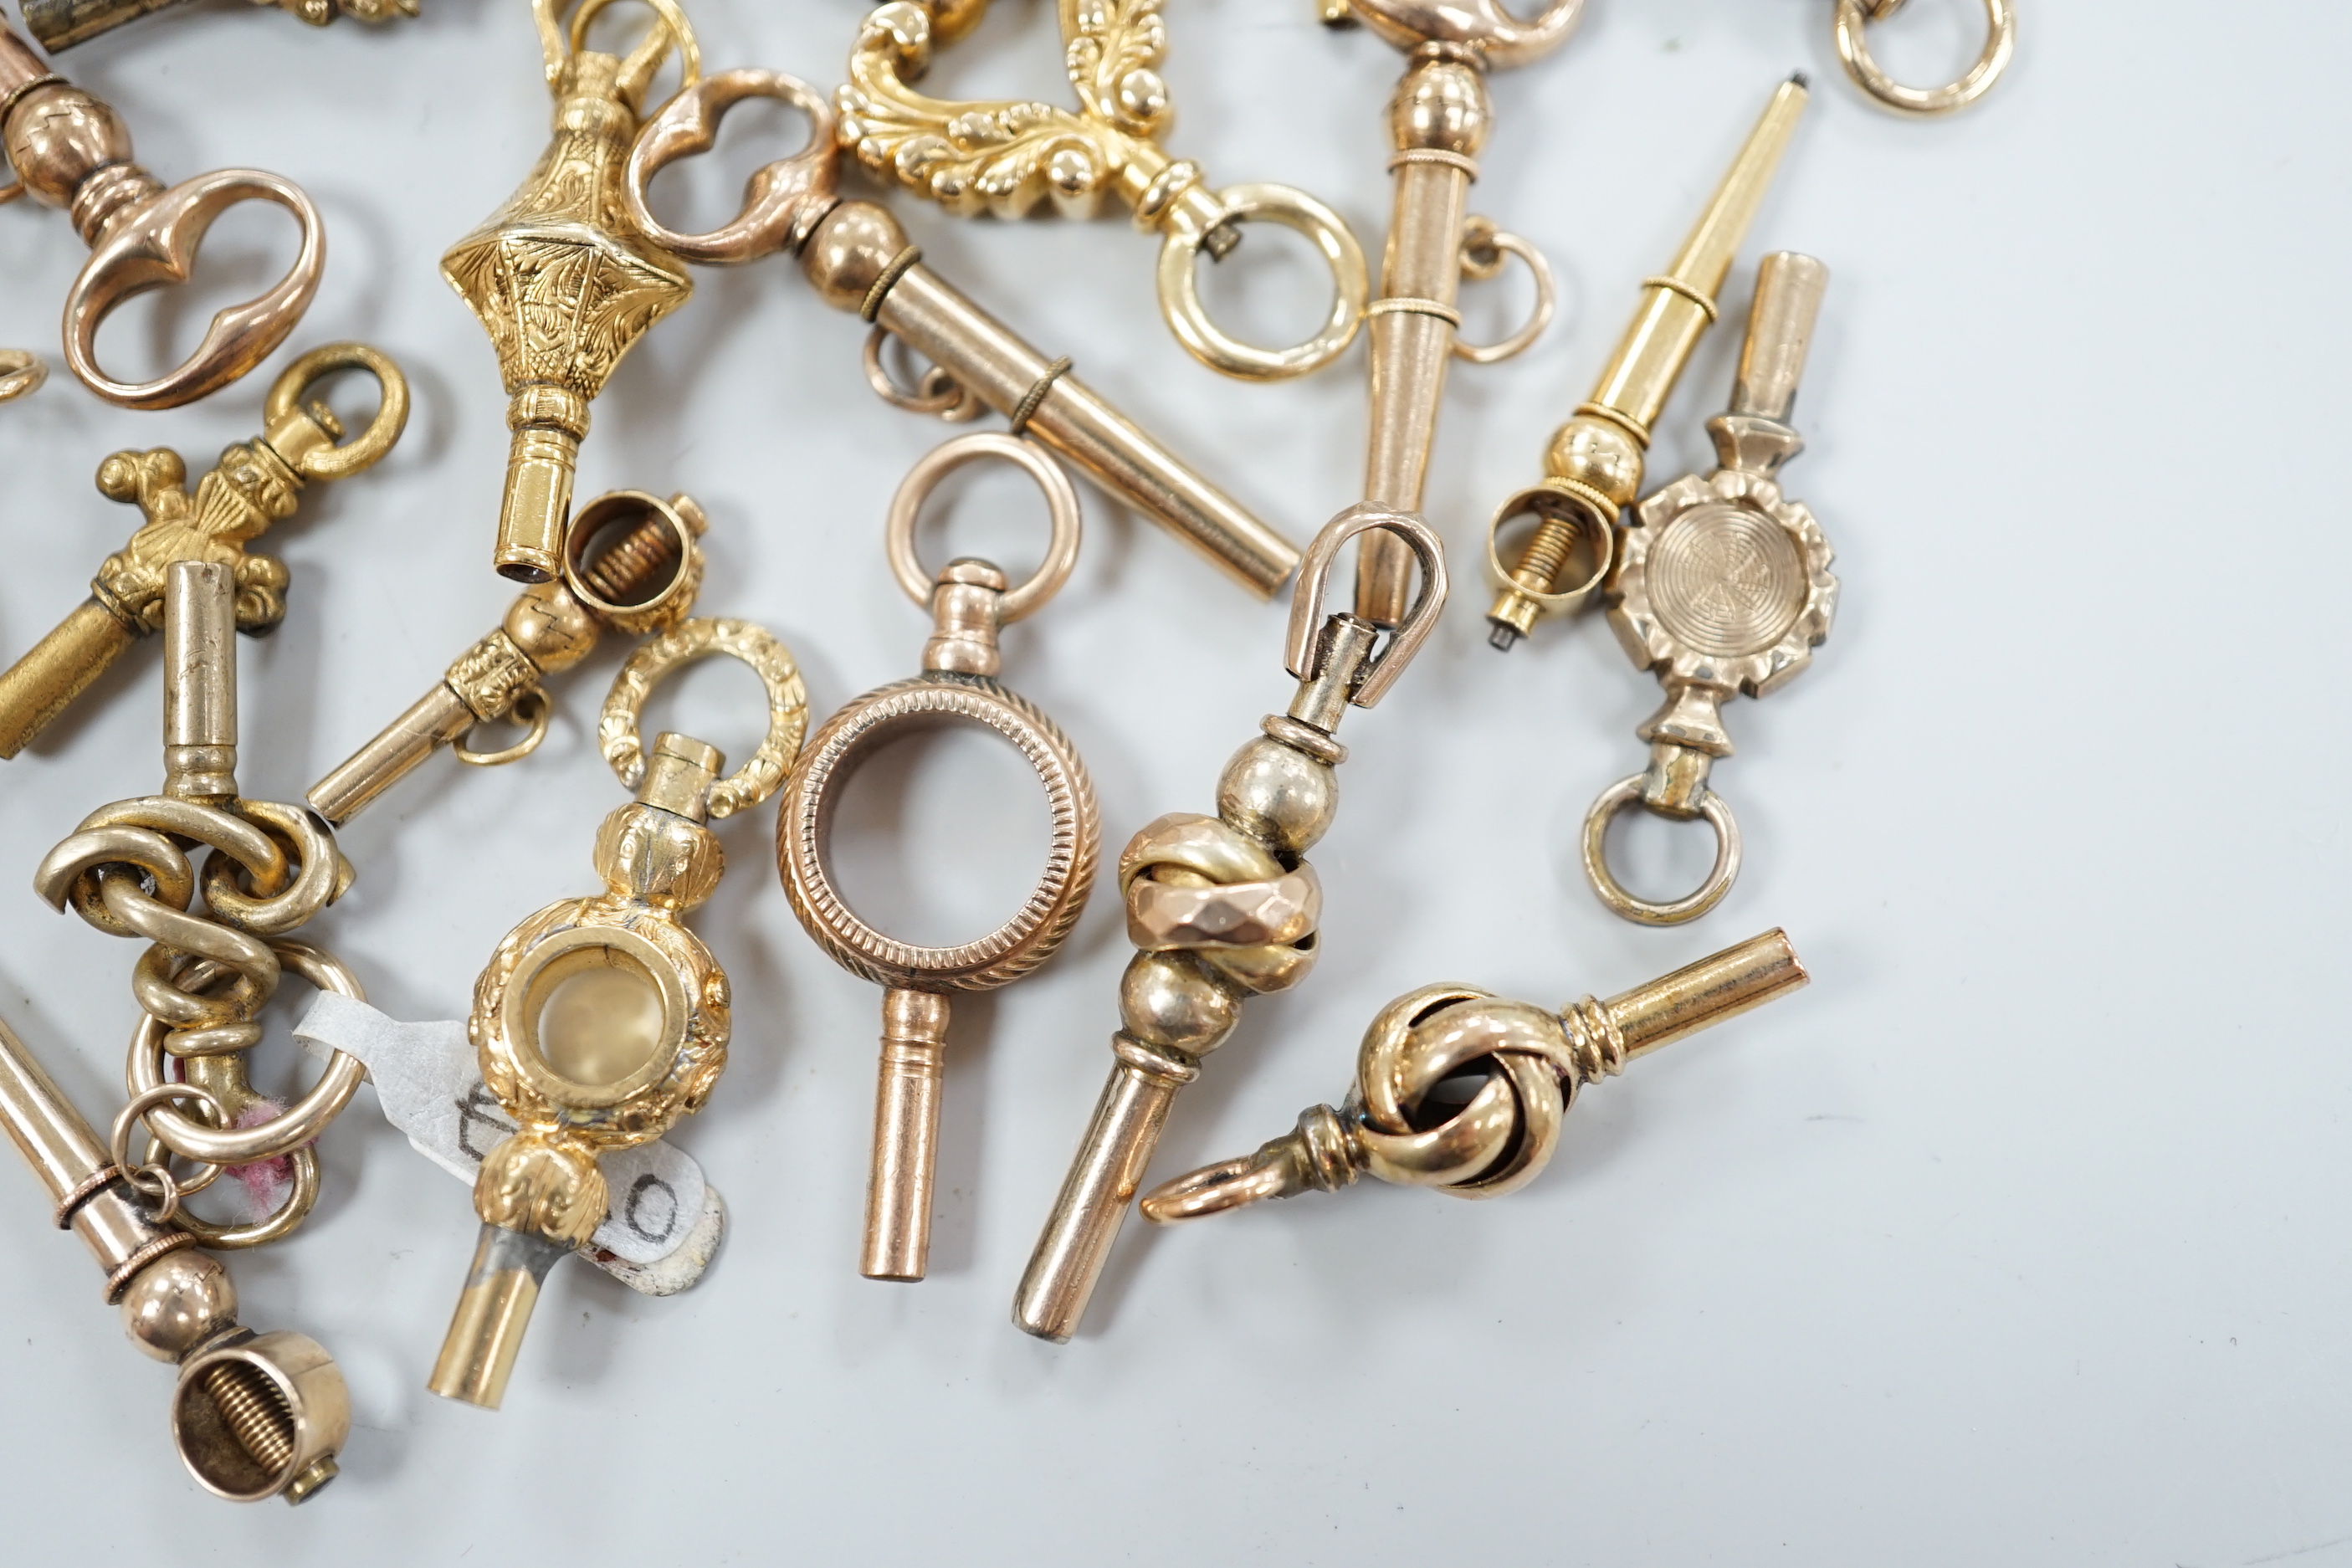 Twenty assorted mainly 19th century yellow metal small watch keys, including trade insignia, bloodstone set and keys to be turned in one direction, largest 37mm, together with a 19th century yellow metal overlaid and aga